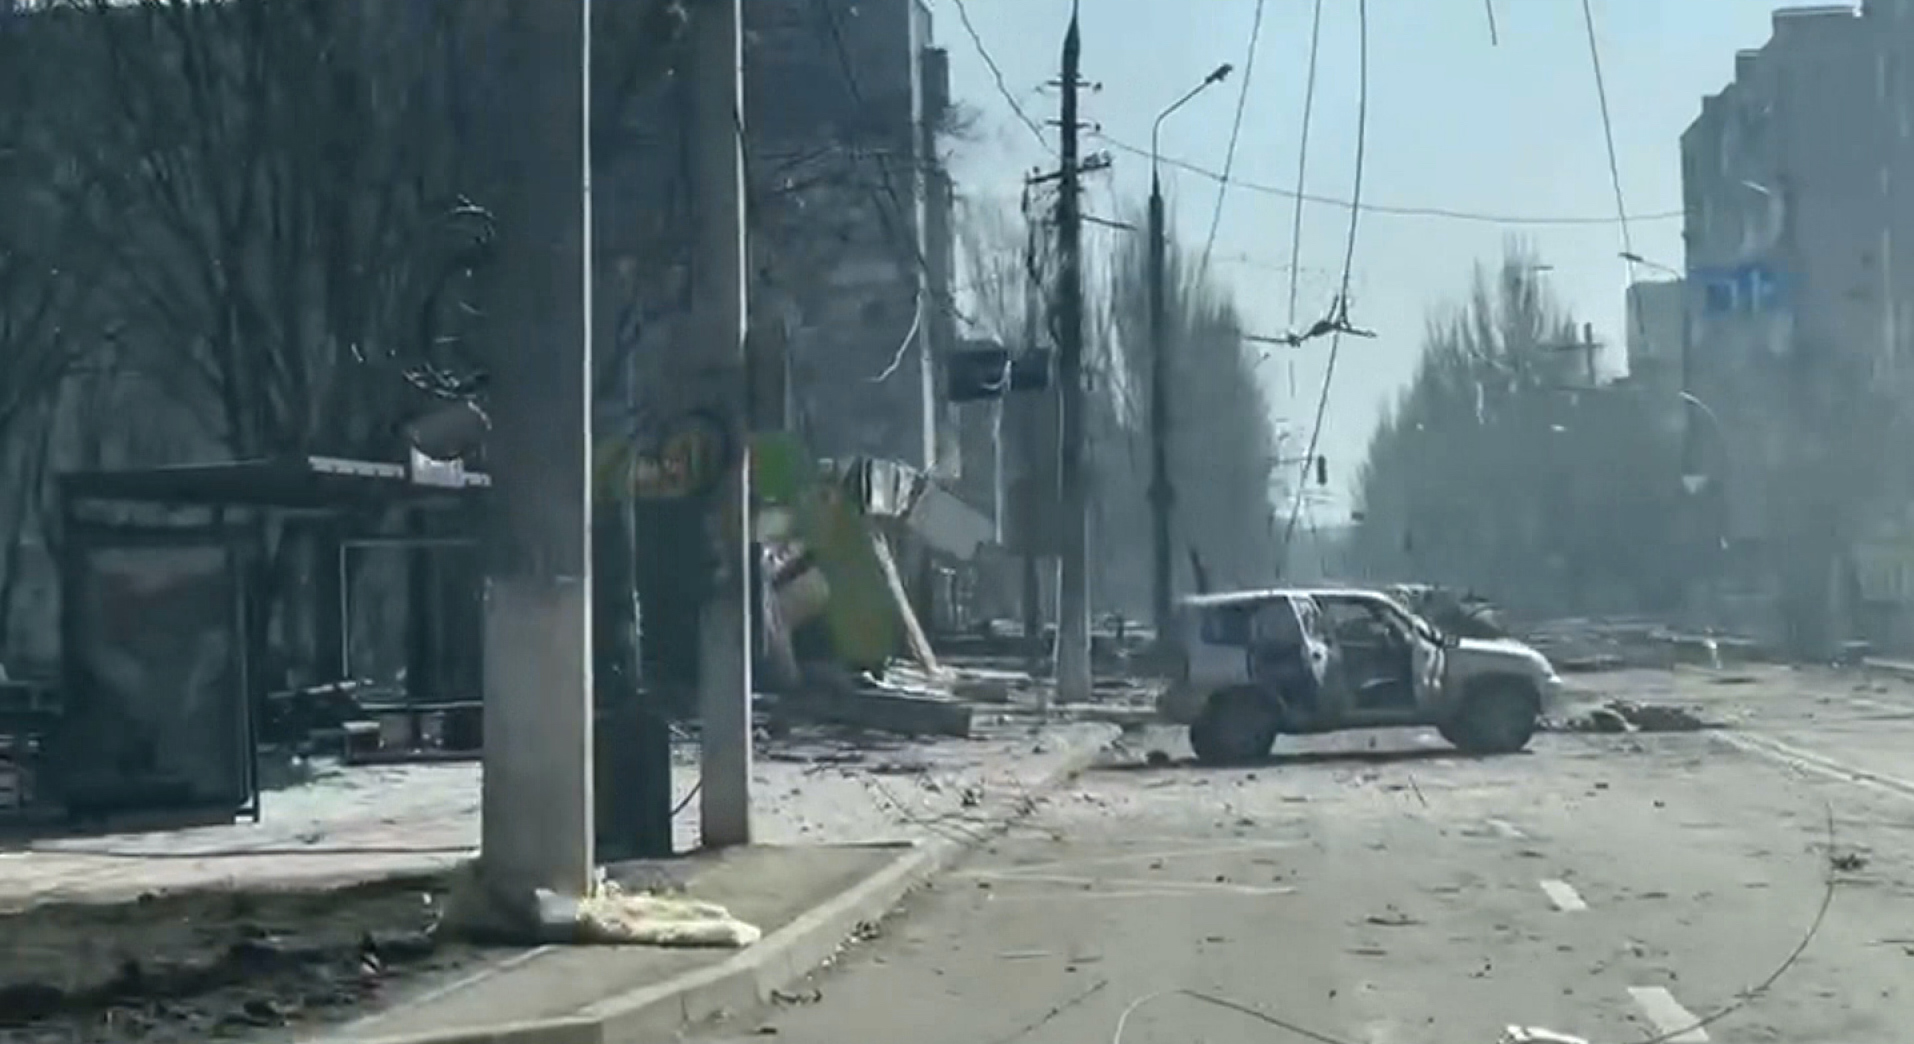 View of Mariupol from a video obtained by DailyExpertNews.